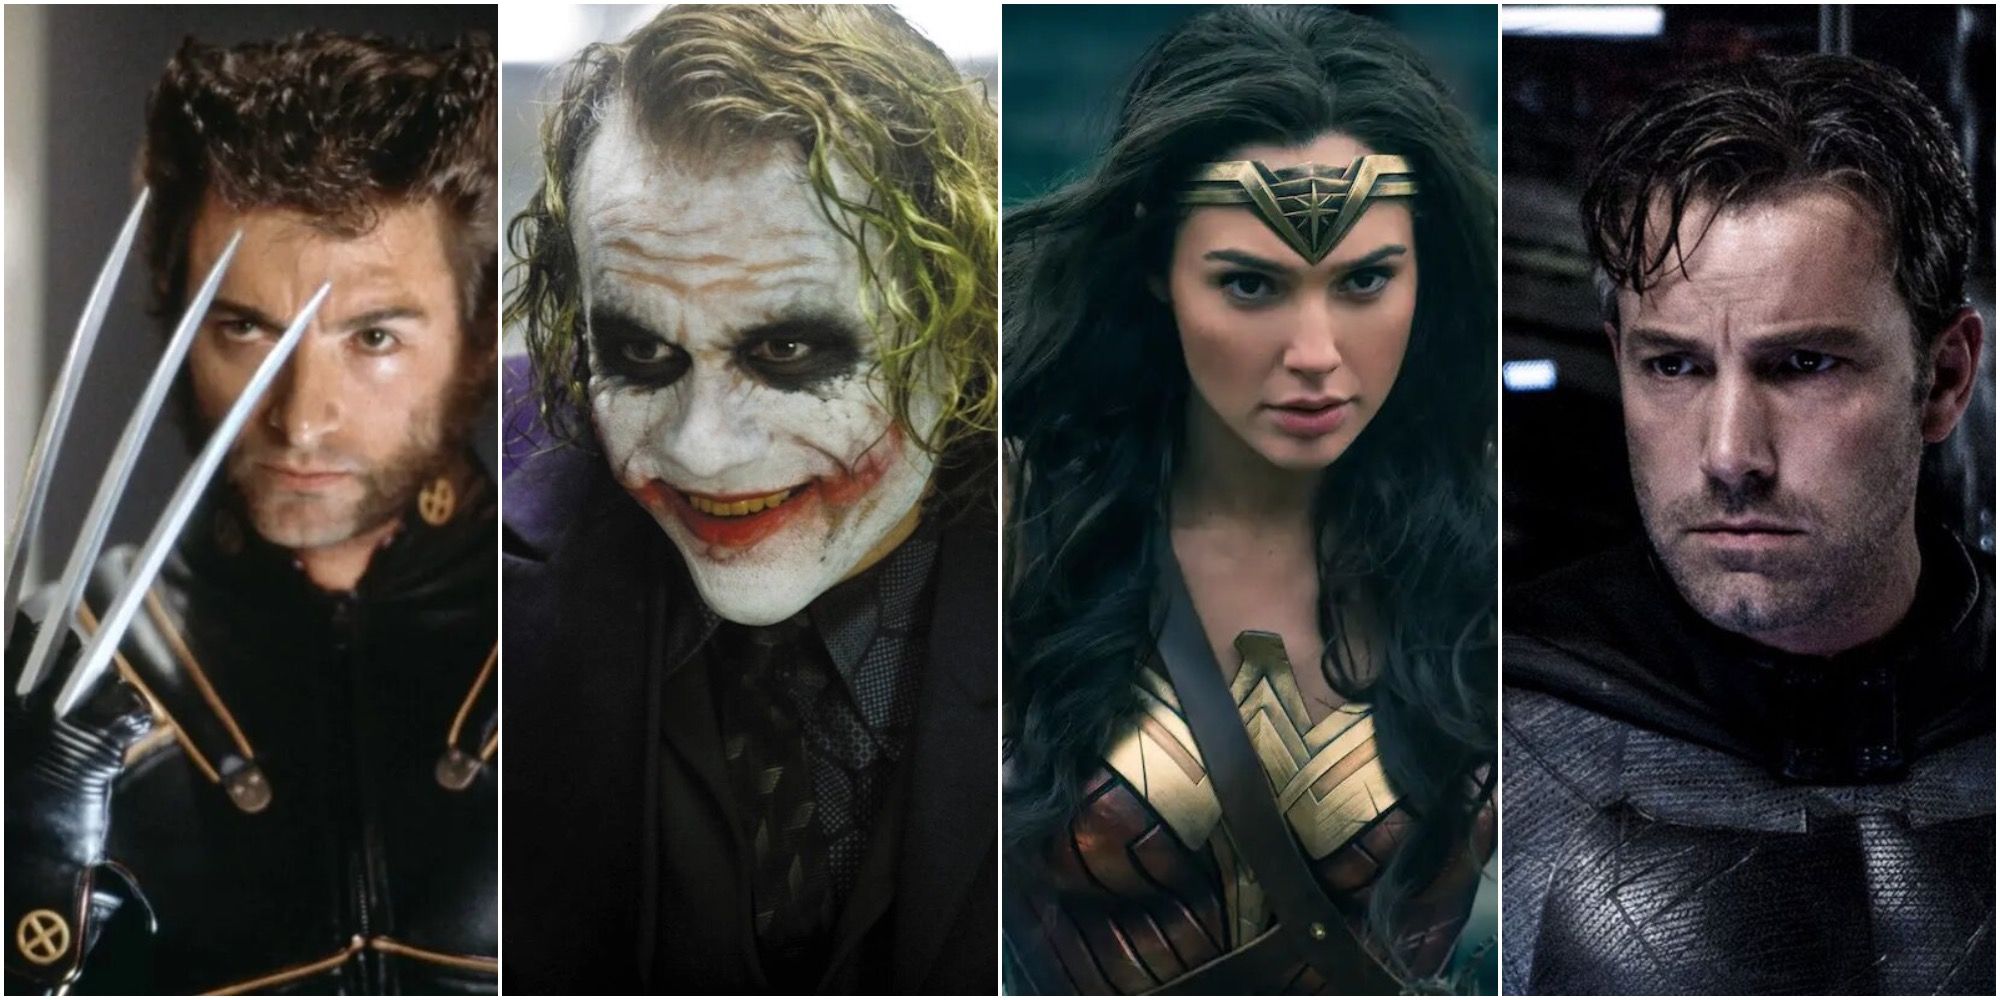 10 Superhero Film Casting Decisions That Individuals Hated However Turned Out Nice